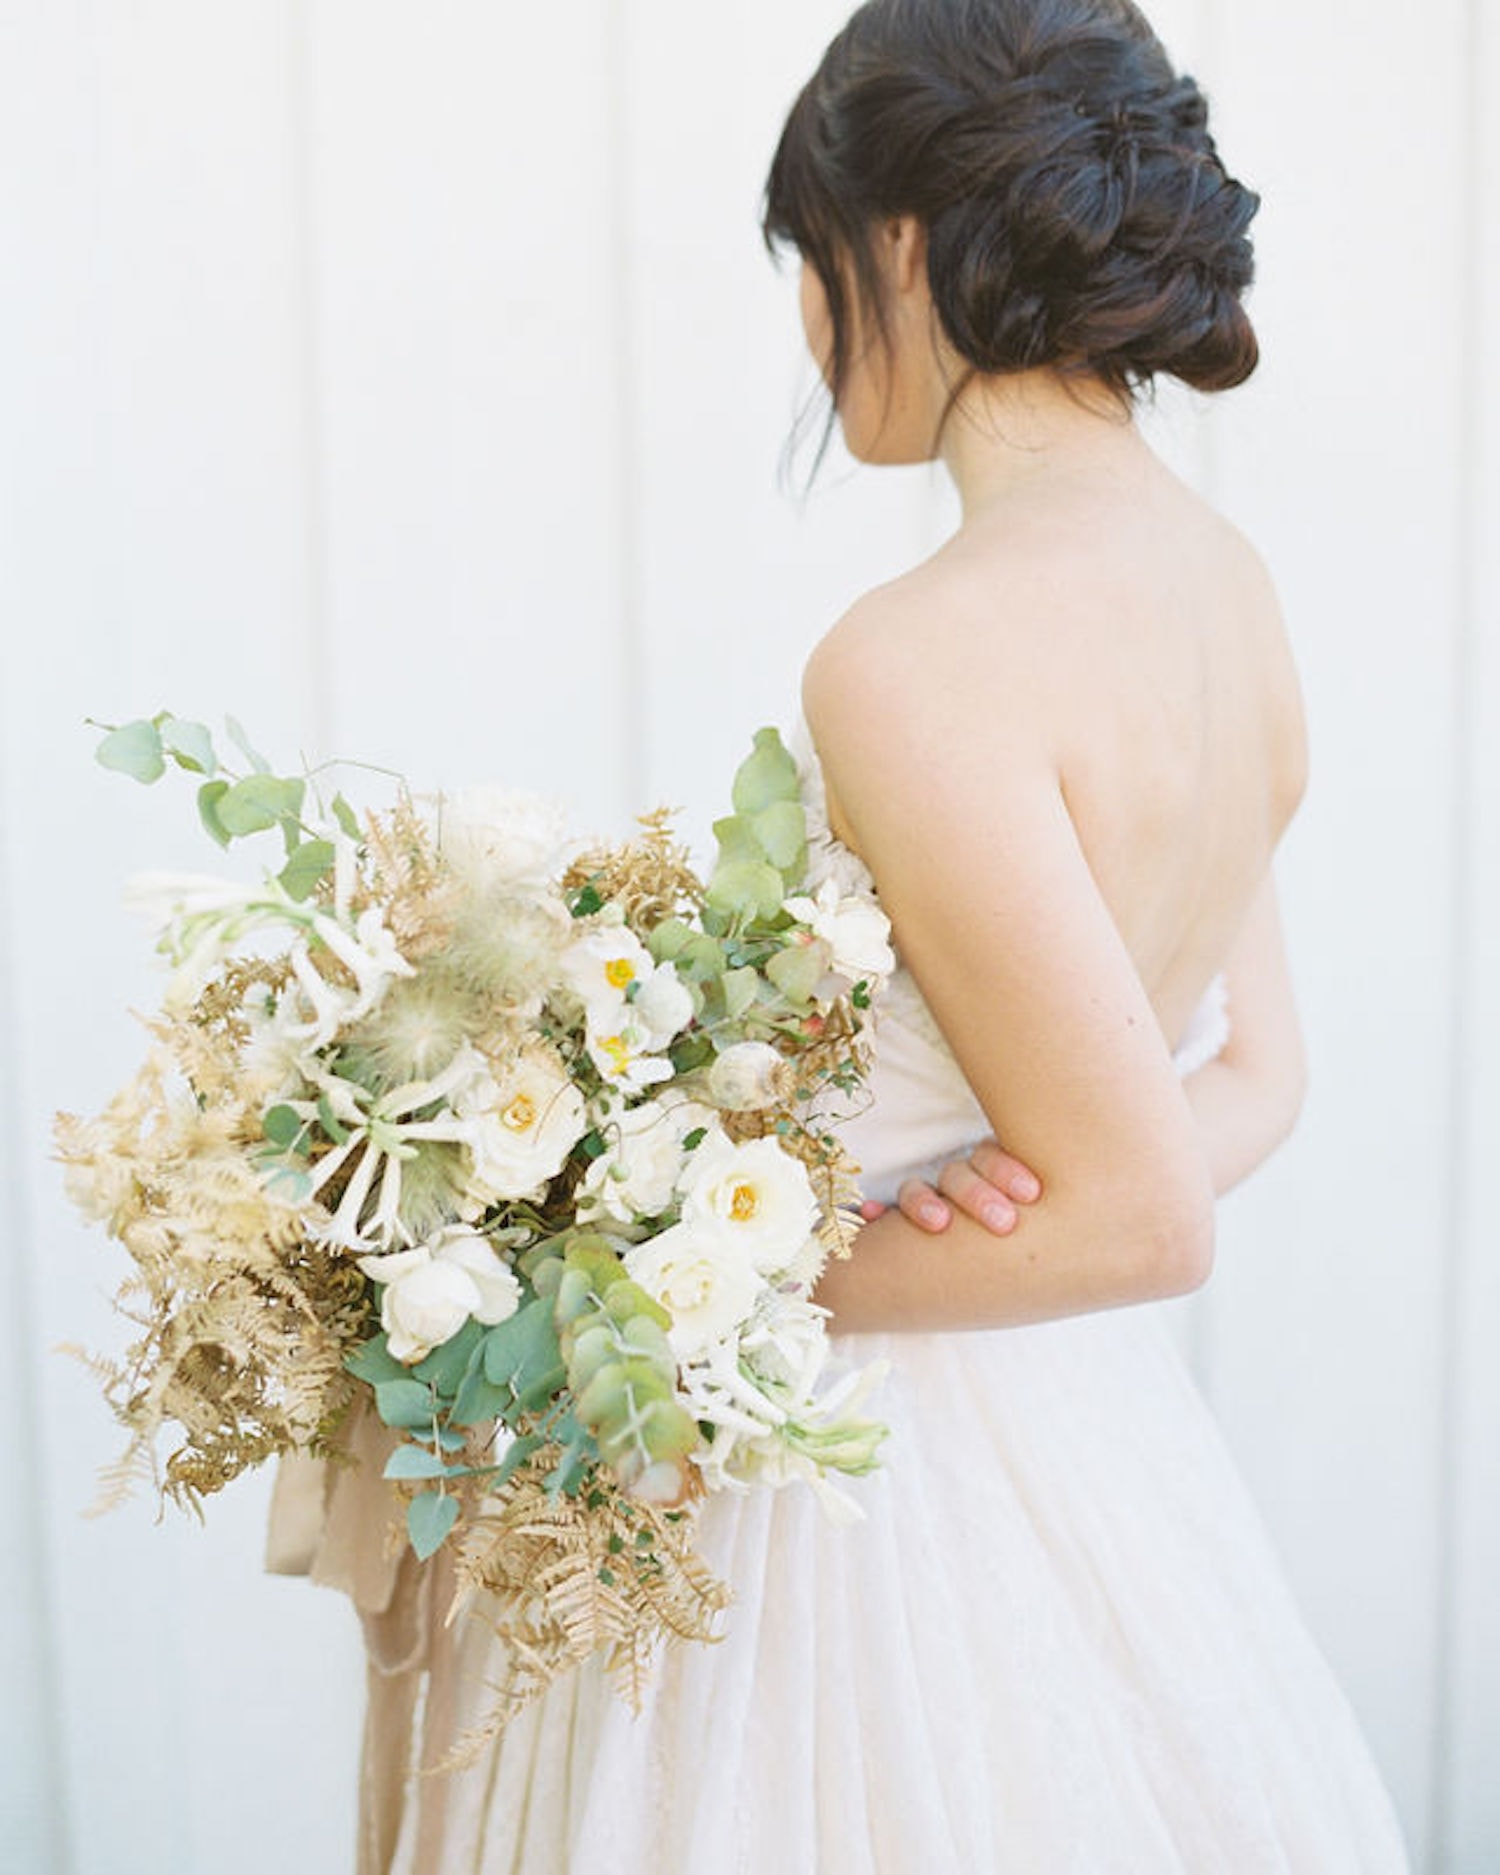 A side shot of a bride holding a lush bouquet of flowers, photo by Marcela Plosker, a Boston wedding photographer who shares 10 questions to ask your wedding photographer before you book.